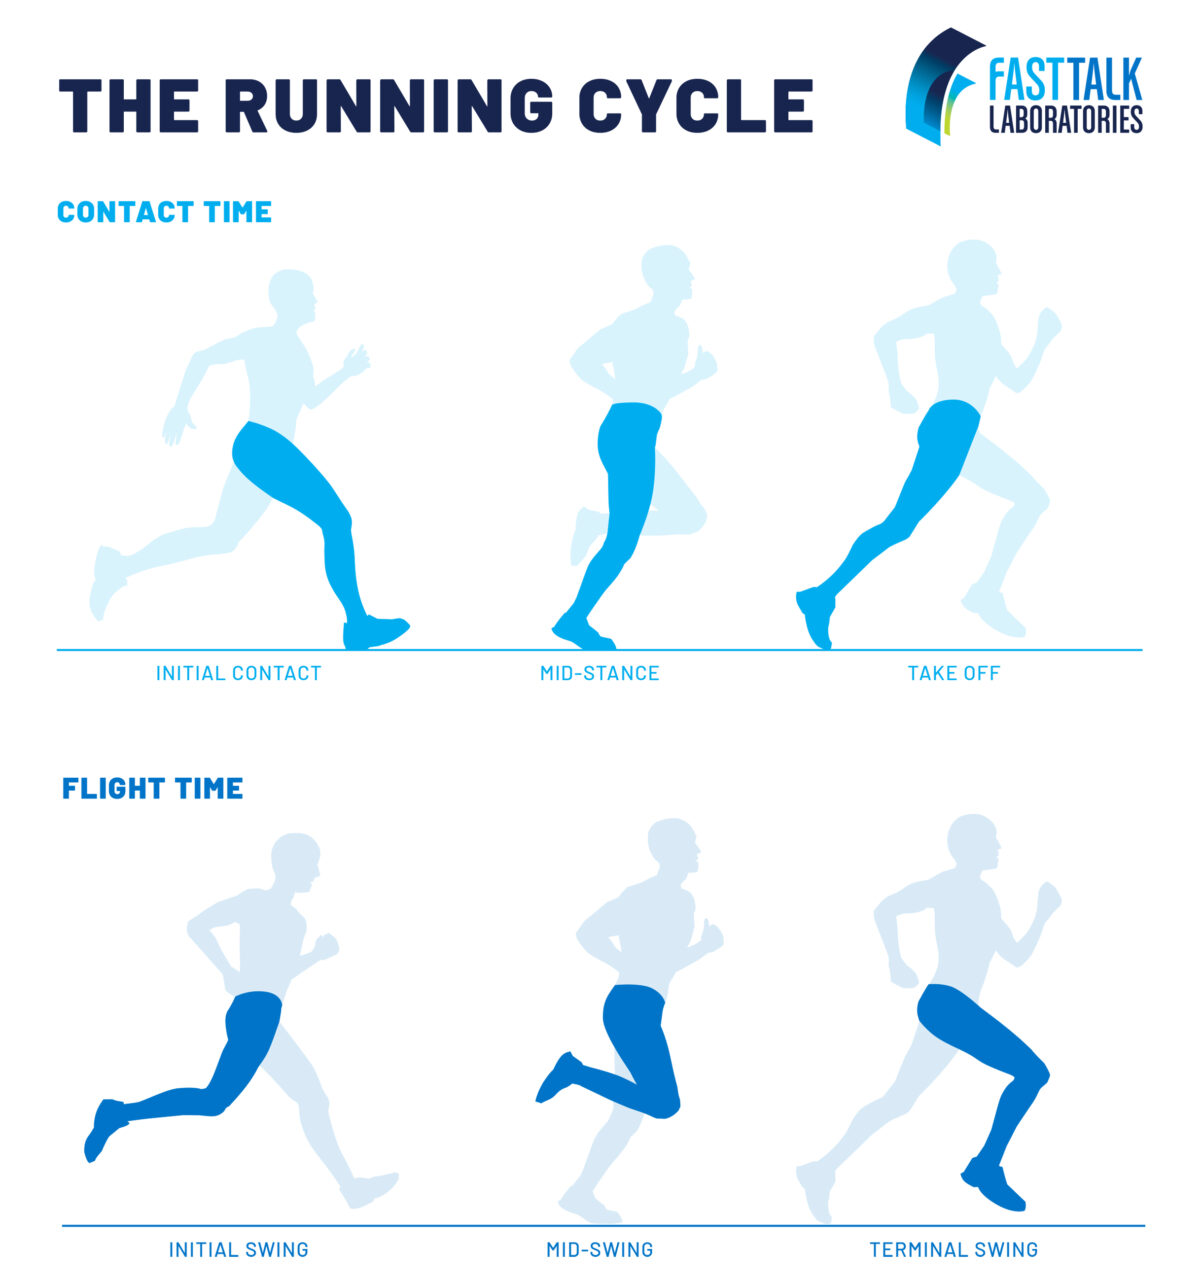 Graphic showing the different phases in the running cycle.